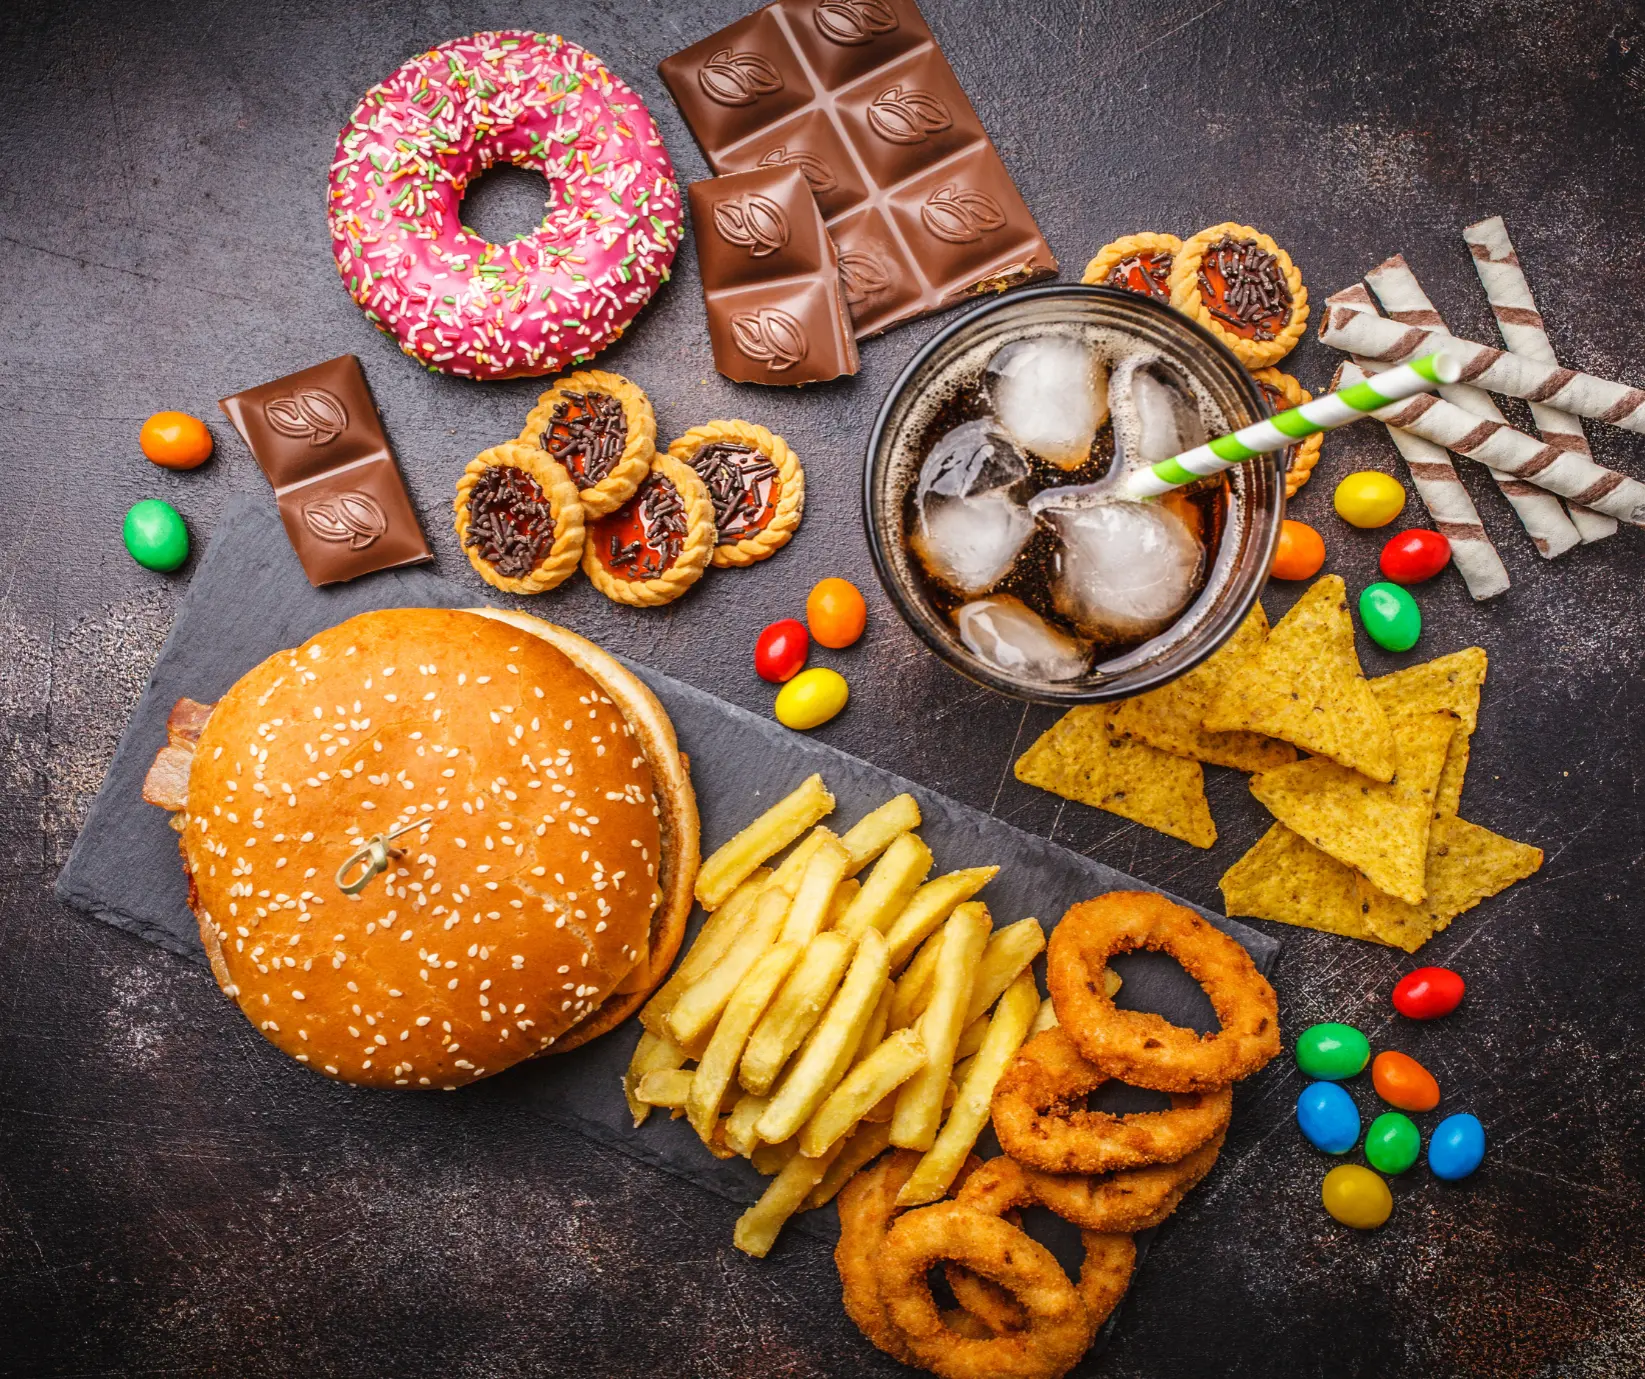 Sugary beverages, grain-based desserts, and other ultra-processed foods largely drive this excessive caloric consumption.